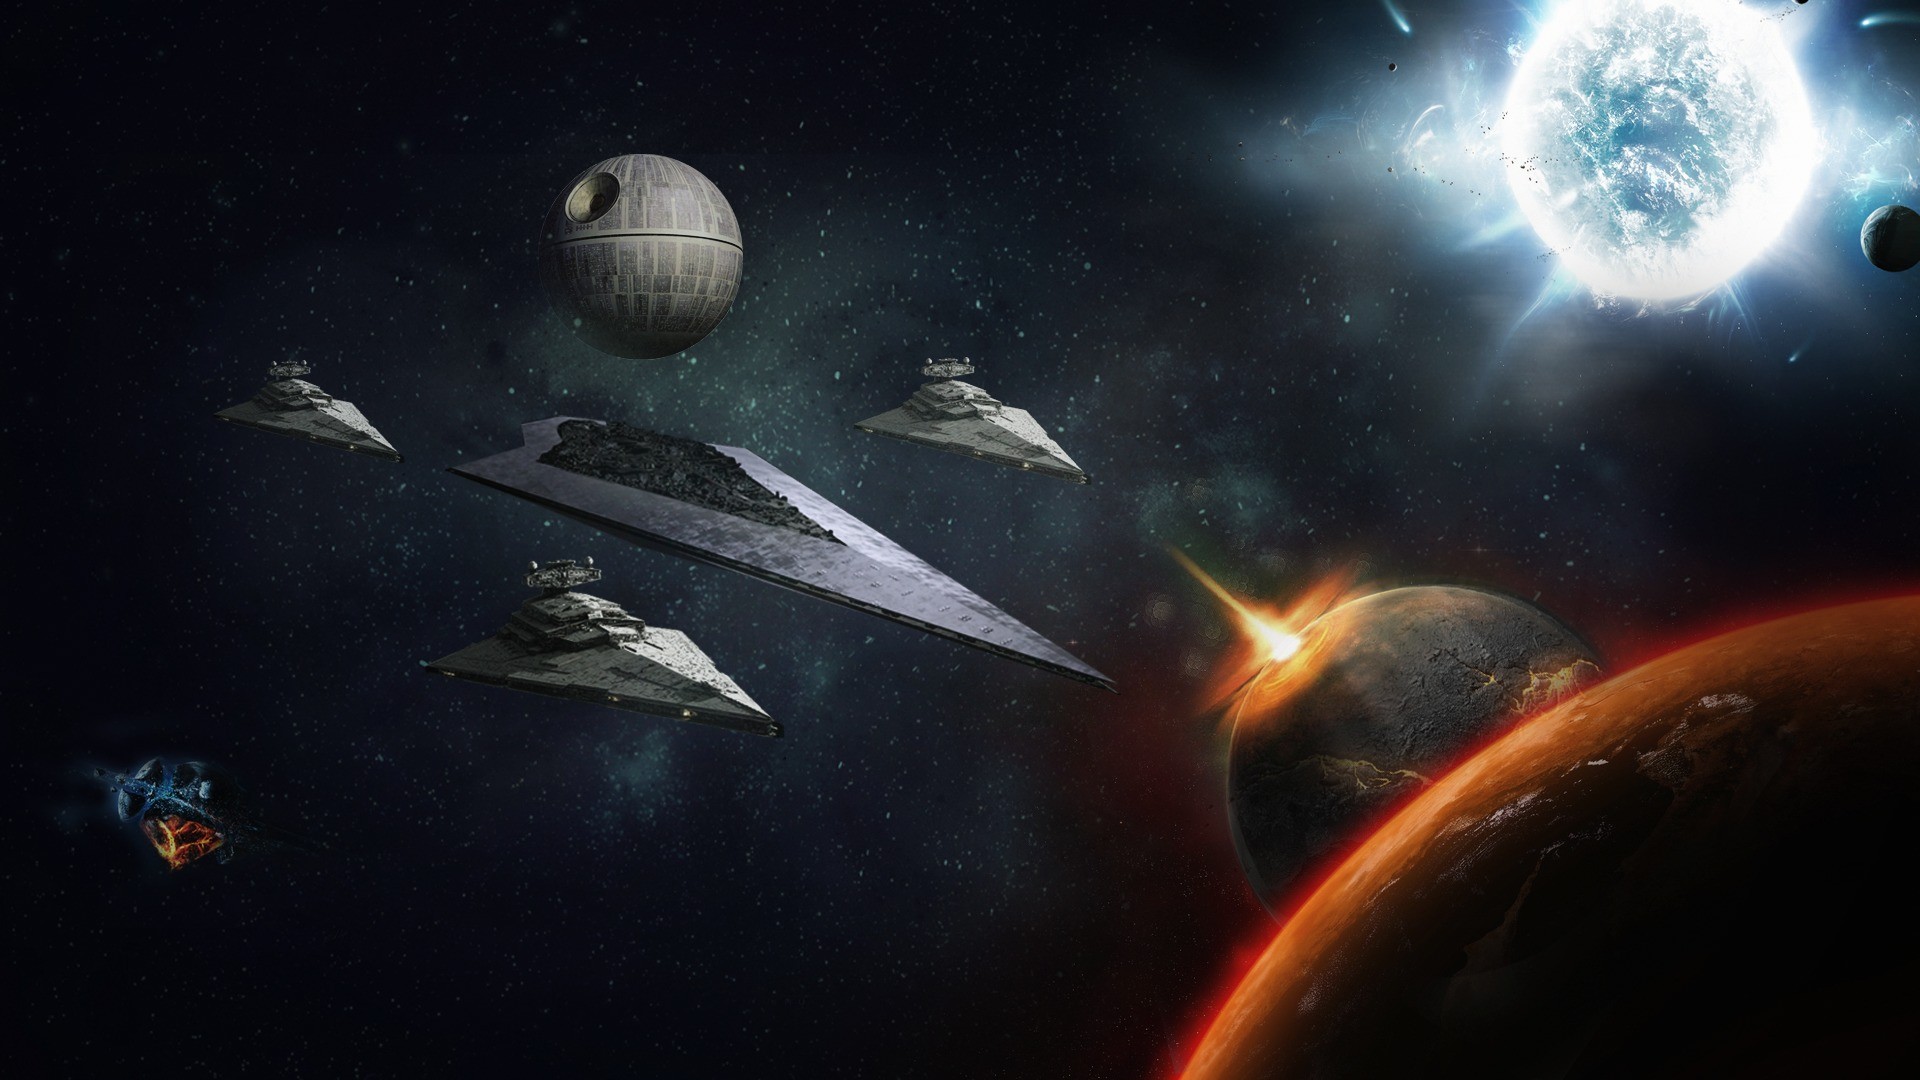 Star   Star Wars Planets Background 9431   HD Wallpaper Download